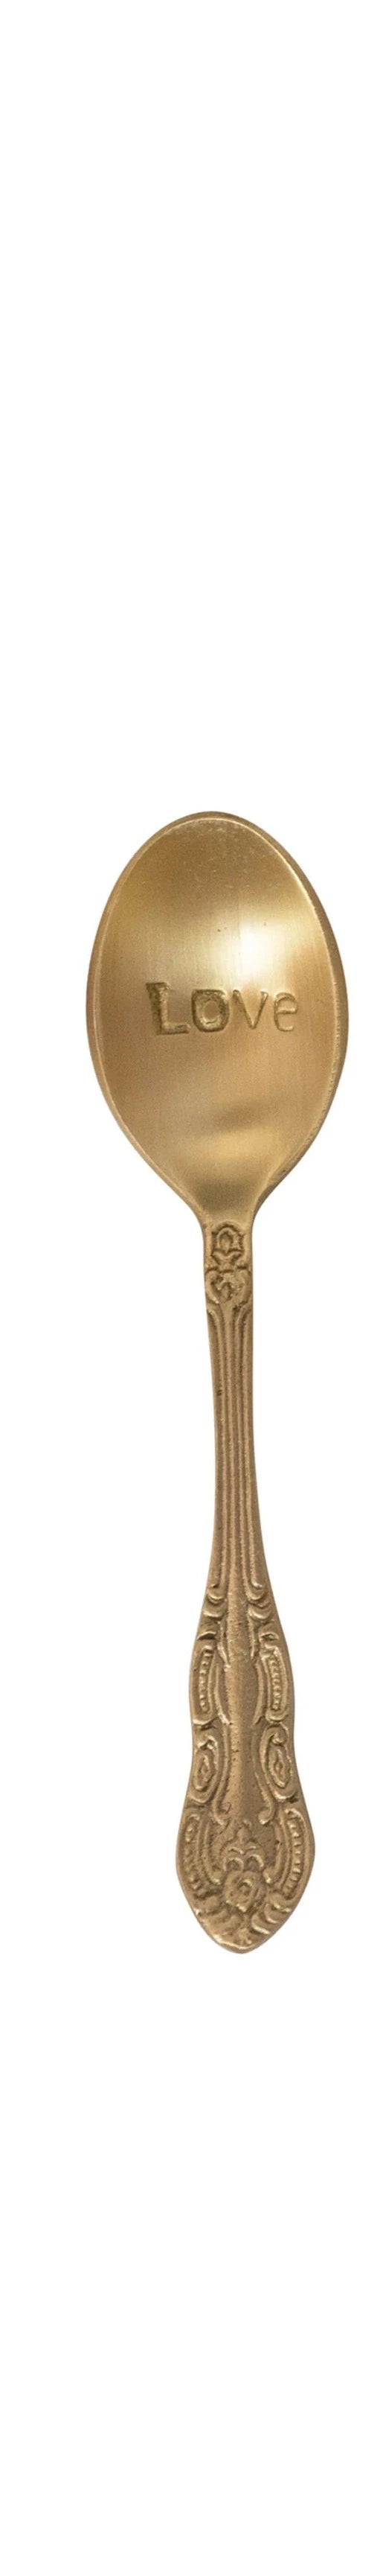 Load image into Gallery viewer, Brass Spoons with Engraved Saying, Love
